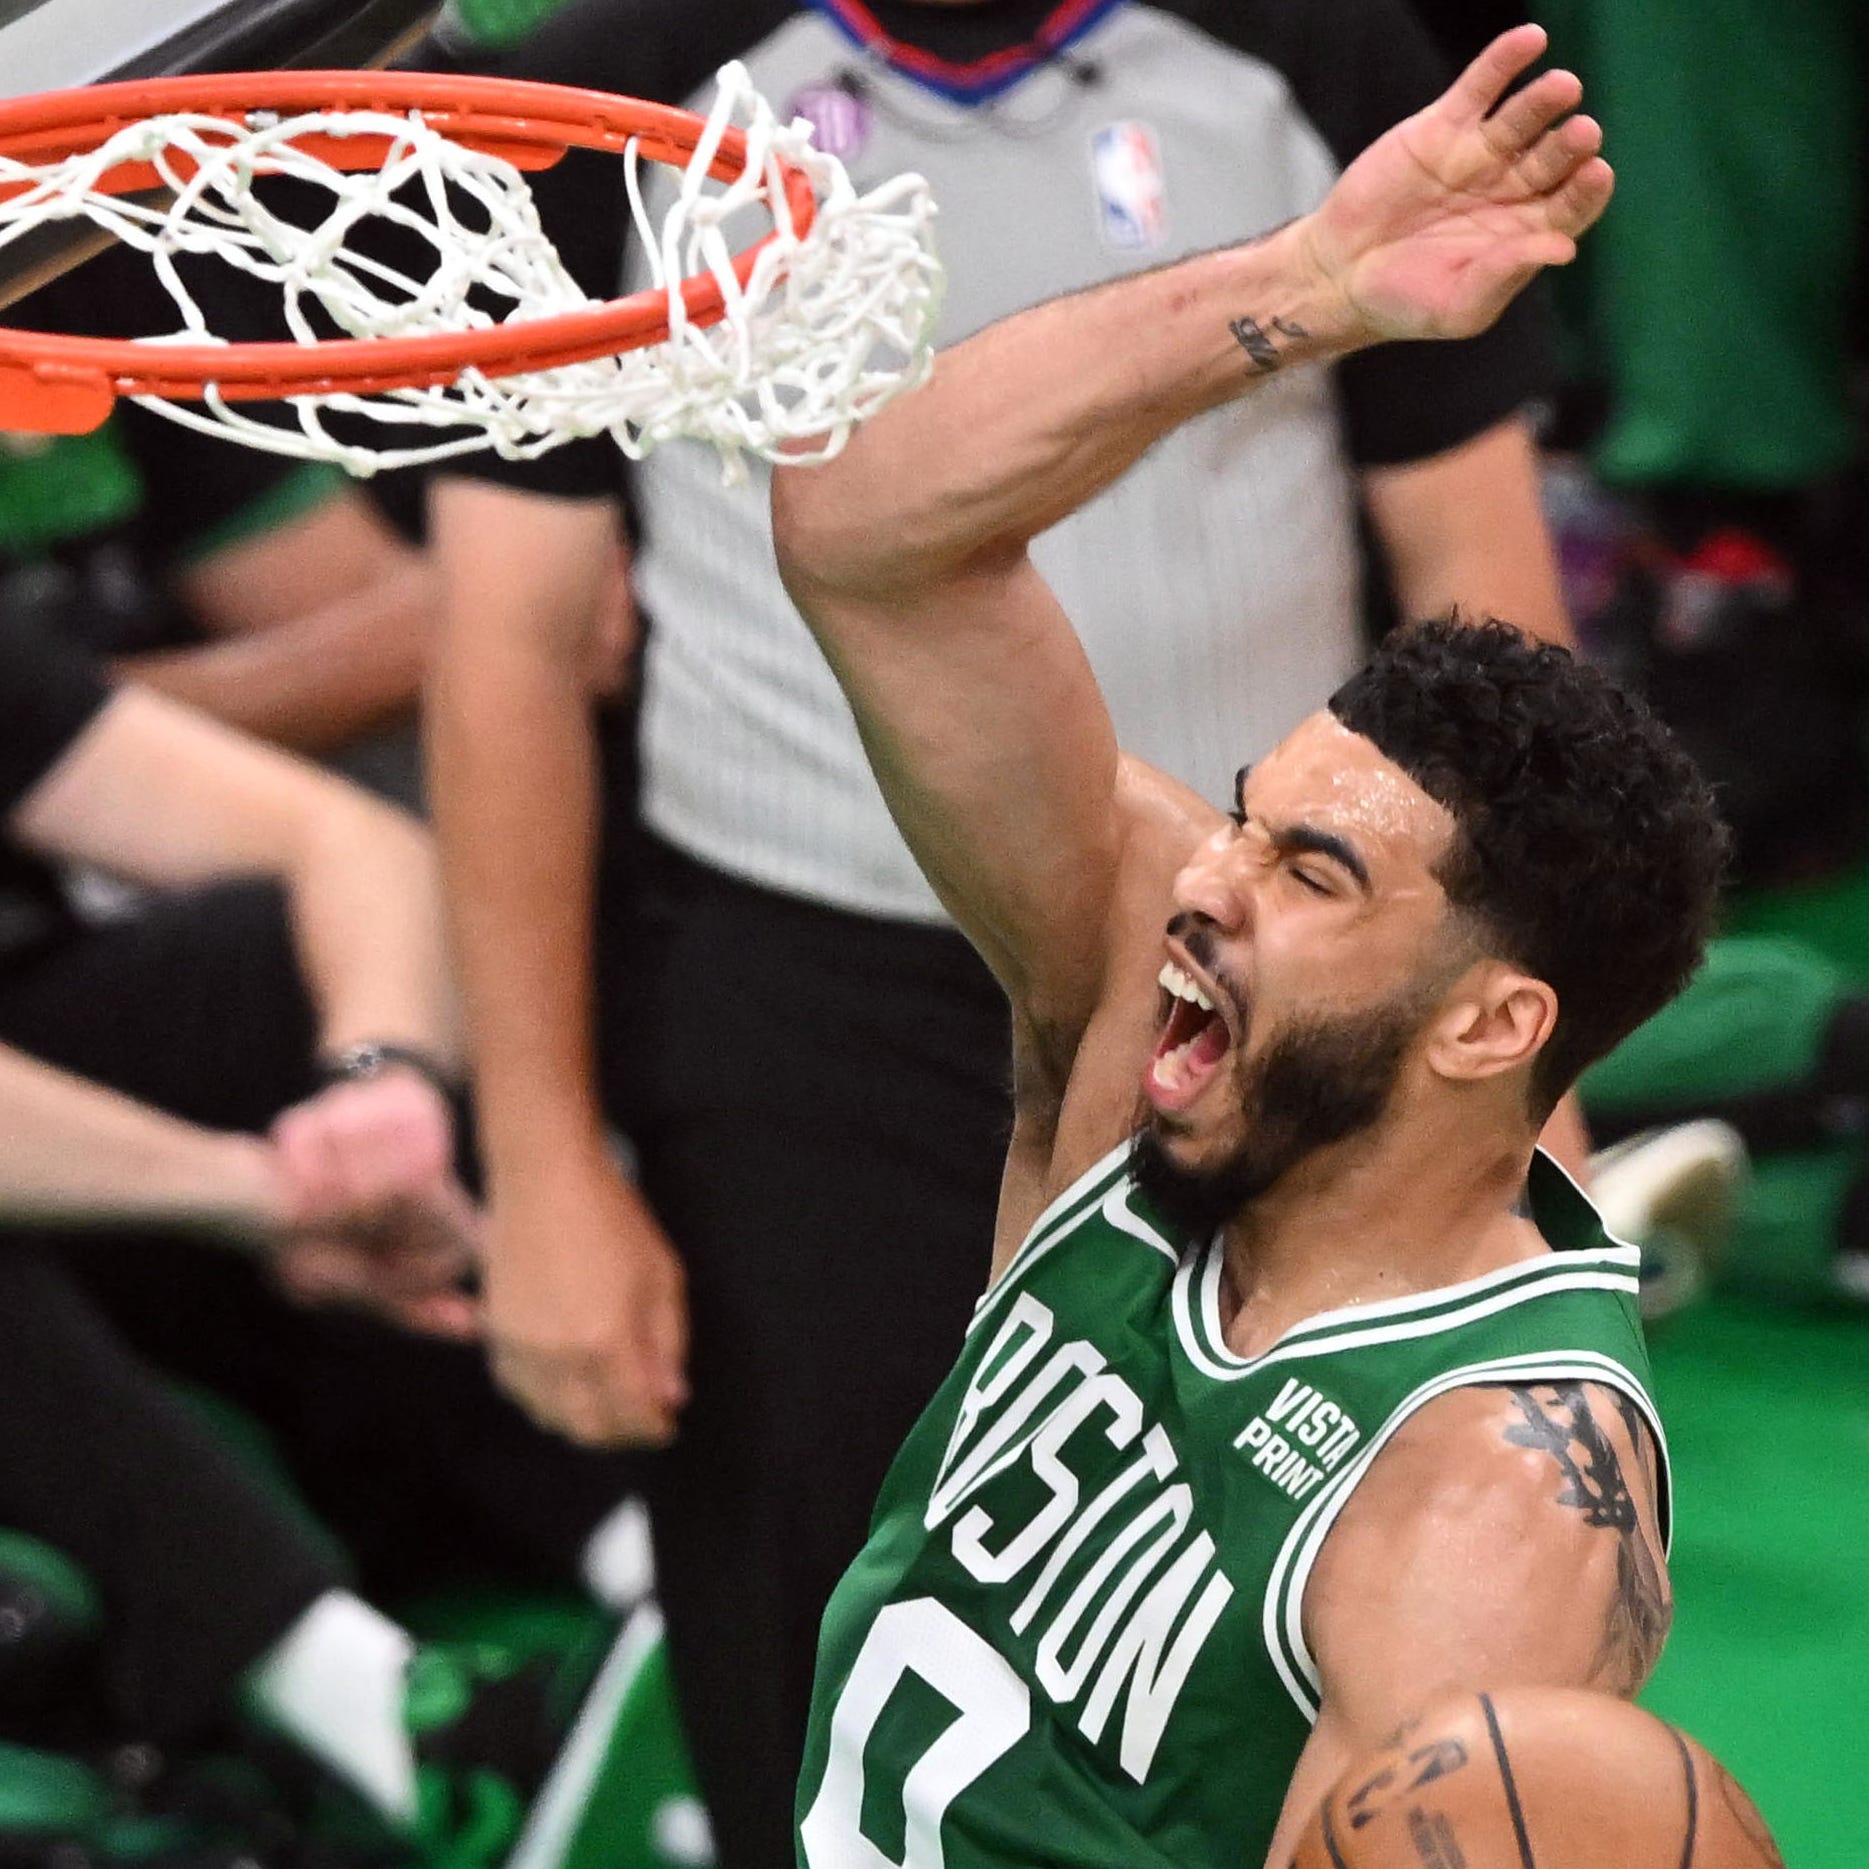 Jayson Tatum reacts after a shot against Miami in the first quarter during Game 5 of the Eastern Conference finals.